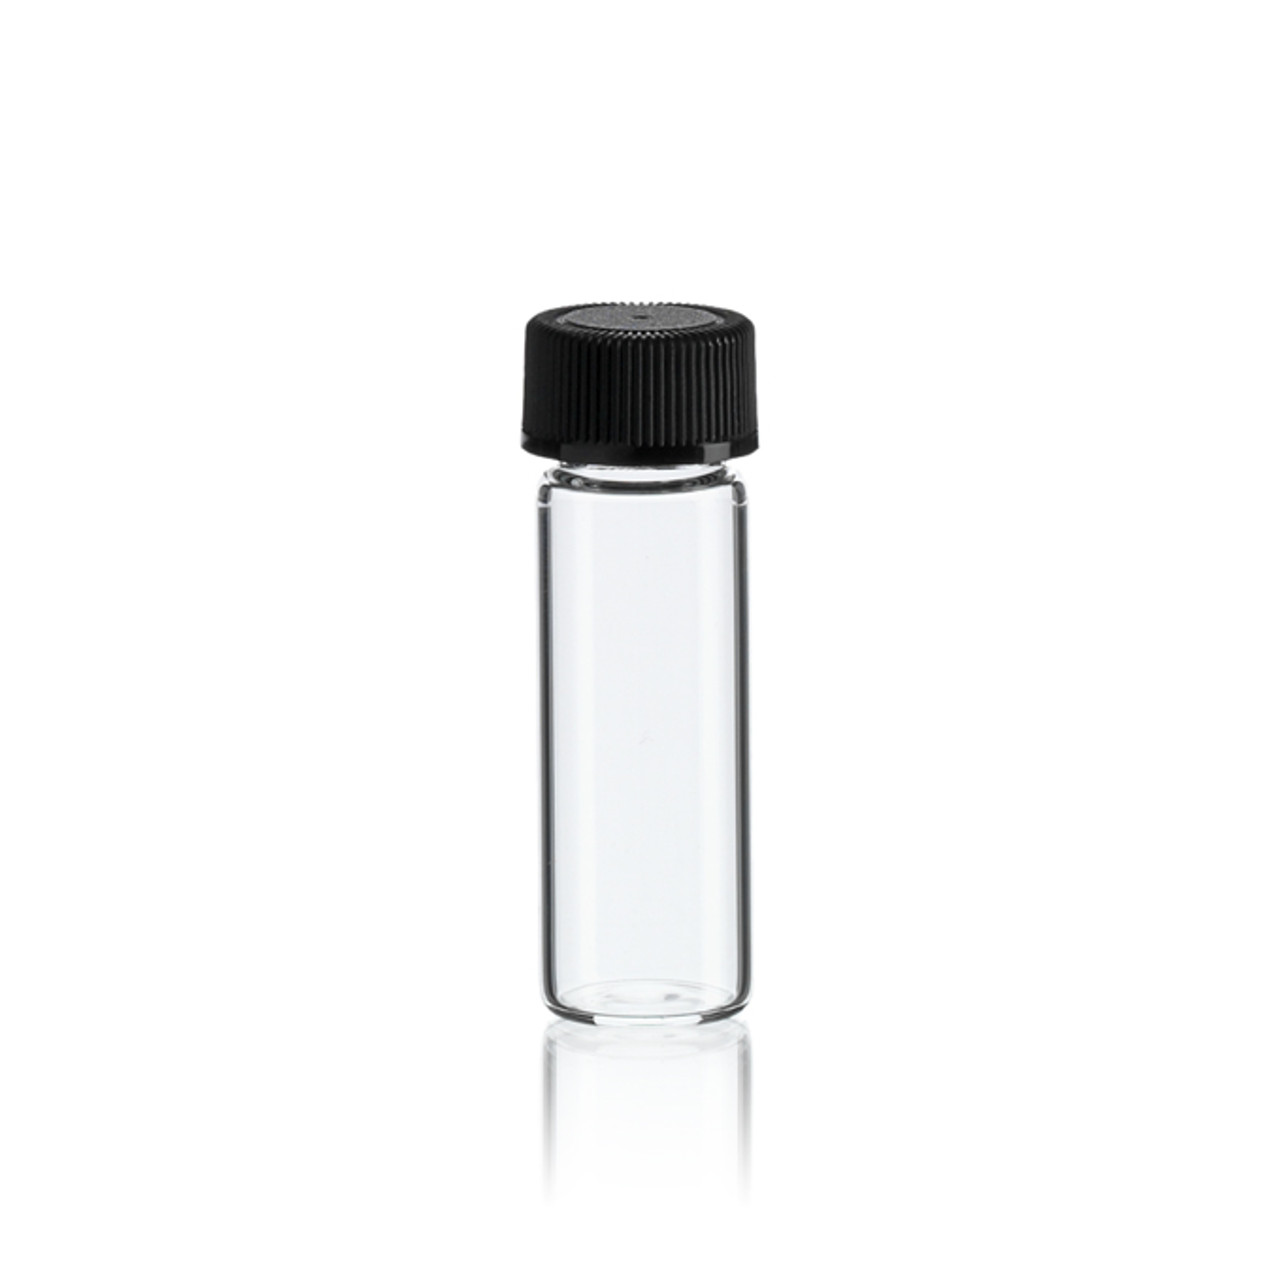 1/2 Dram Vials for Essential Oils Anointing Oil Container Keychain Black & Samples 2mL Glass Bottle Inside Protective Metal Casing with Screw-Top Lid Holy Water 